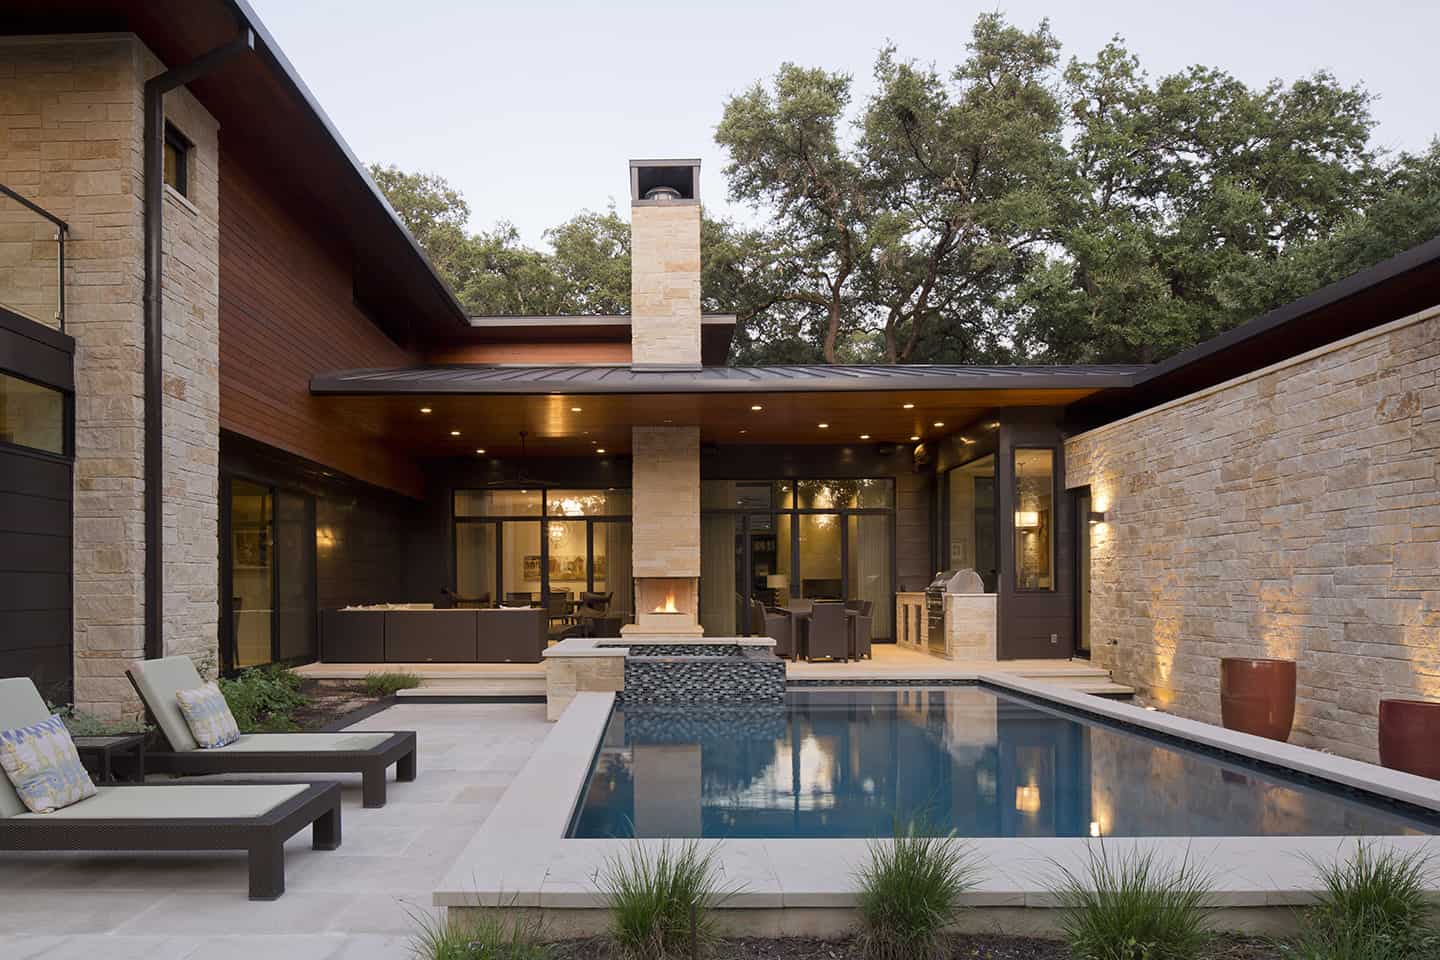 Cherry Lane Residence designed by Jay Corder Architect in Austin TX